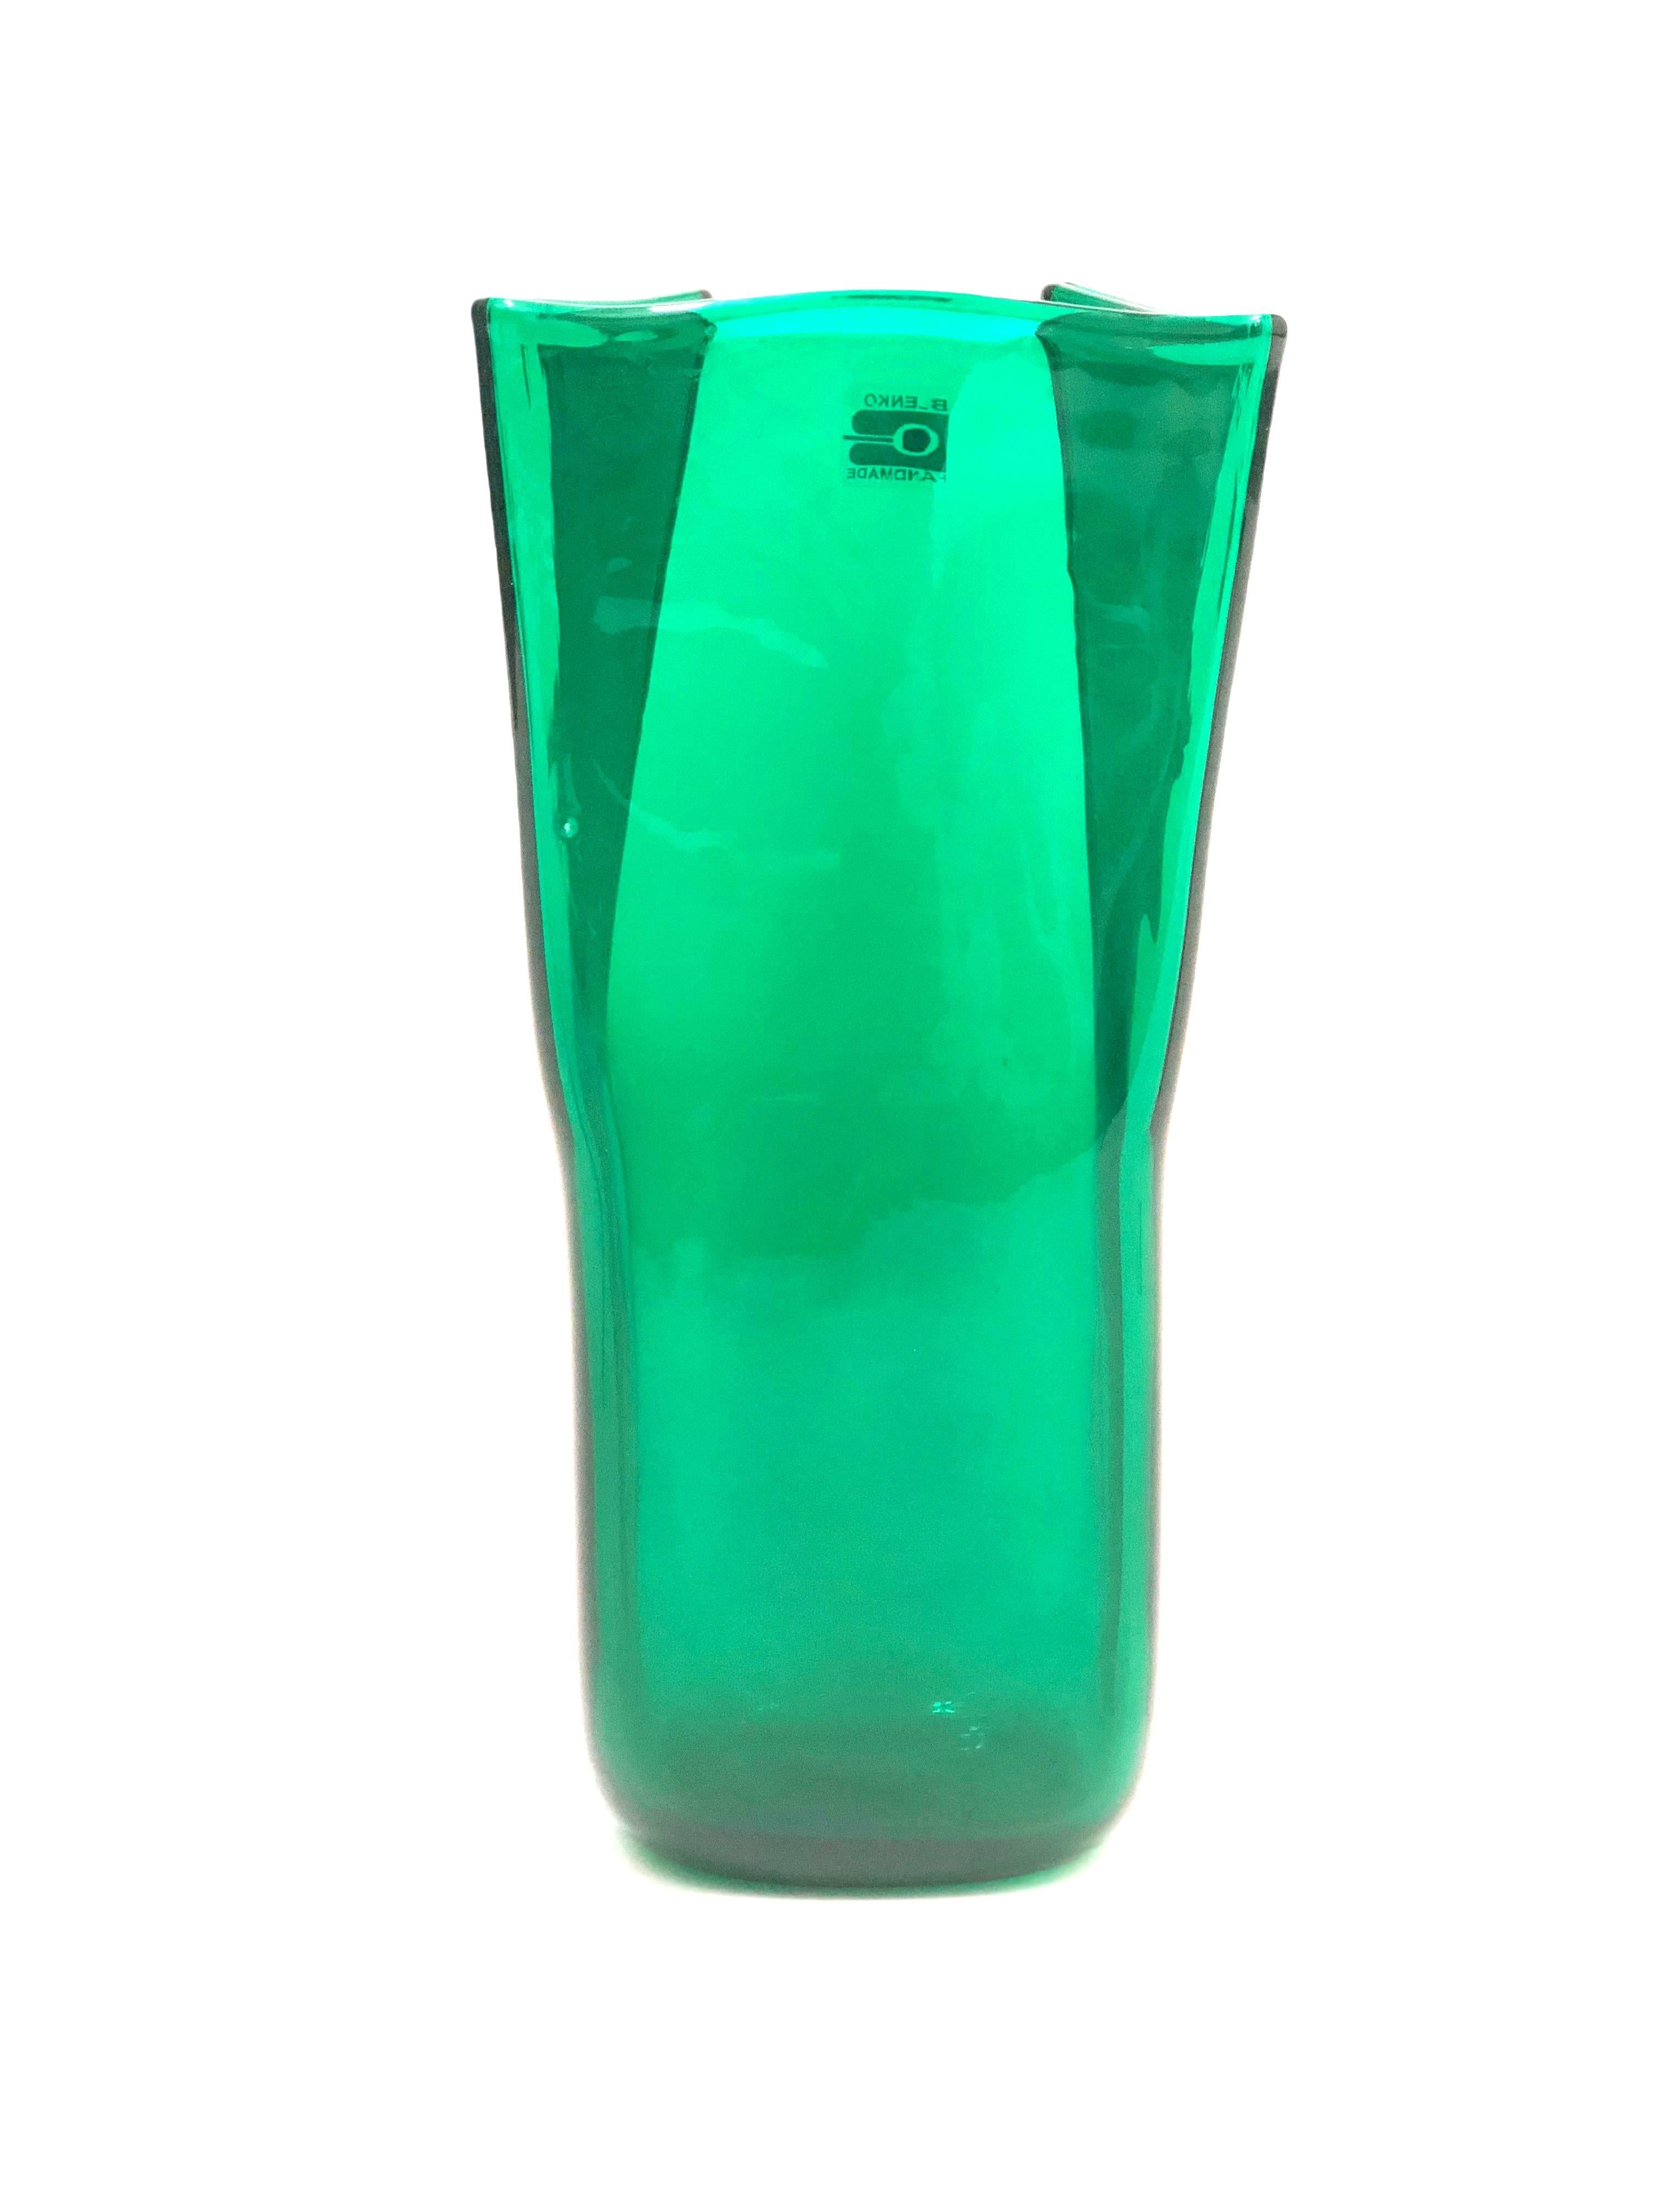 An elegant midcentury green folded glass vase by Don Shepherd for Blenko.

Don Shepherd (1930-2002) was a noted Connecticut artist and designer who worked for Blenko from 1974 to 1988. After leaving Blenko, he became a designer for Herman Miller.